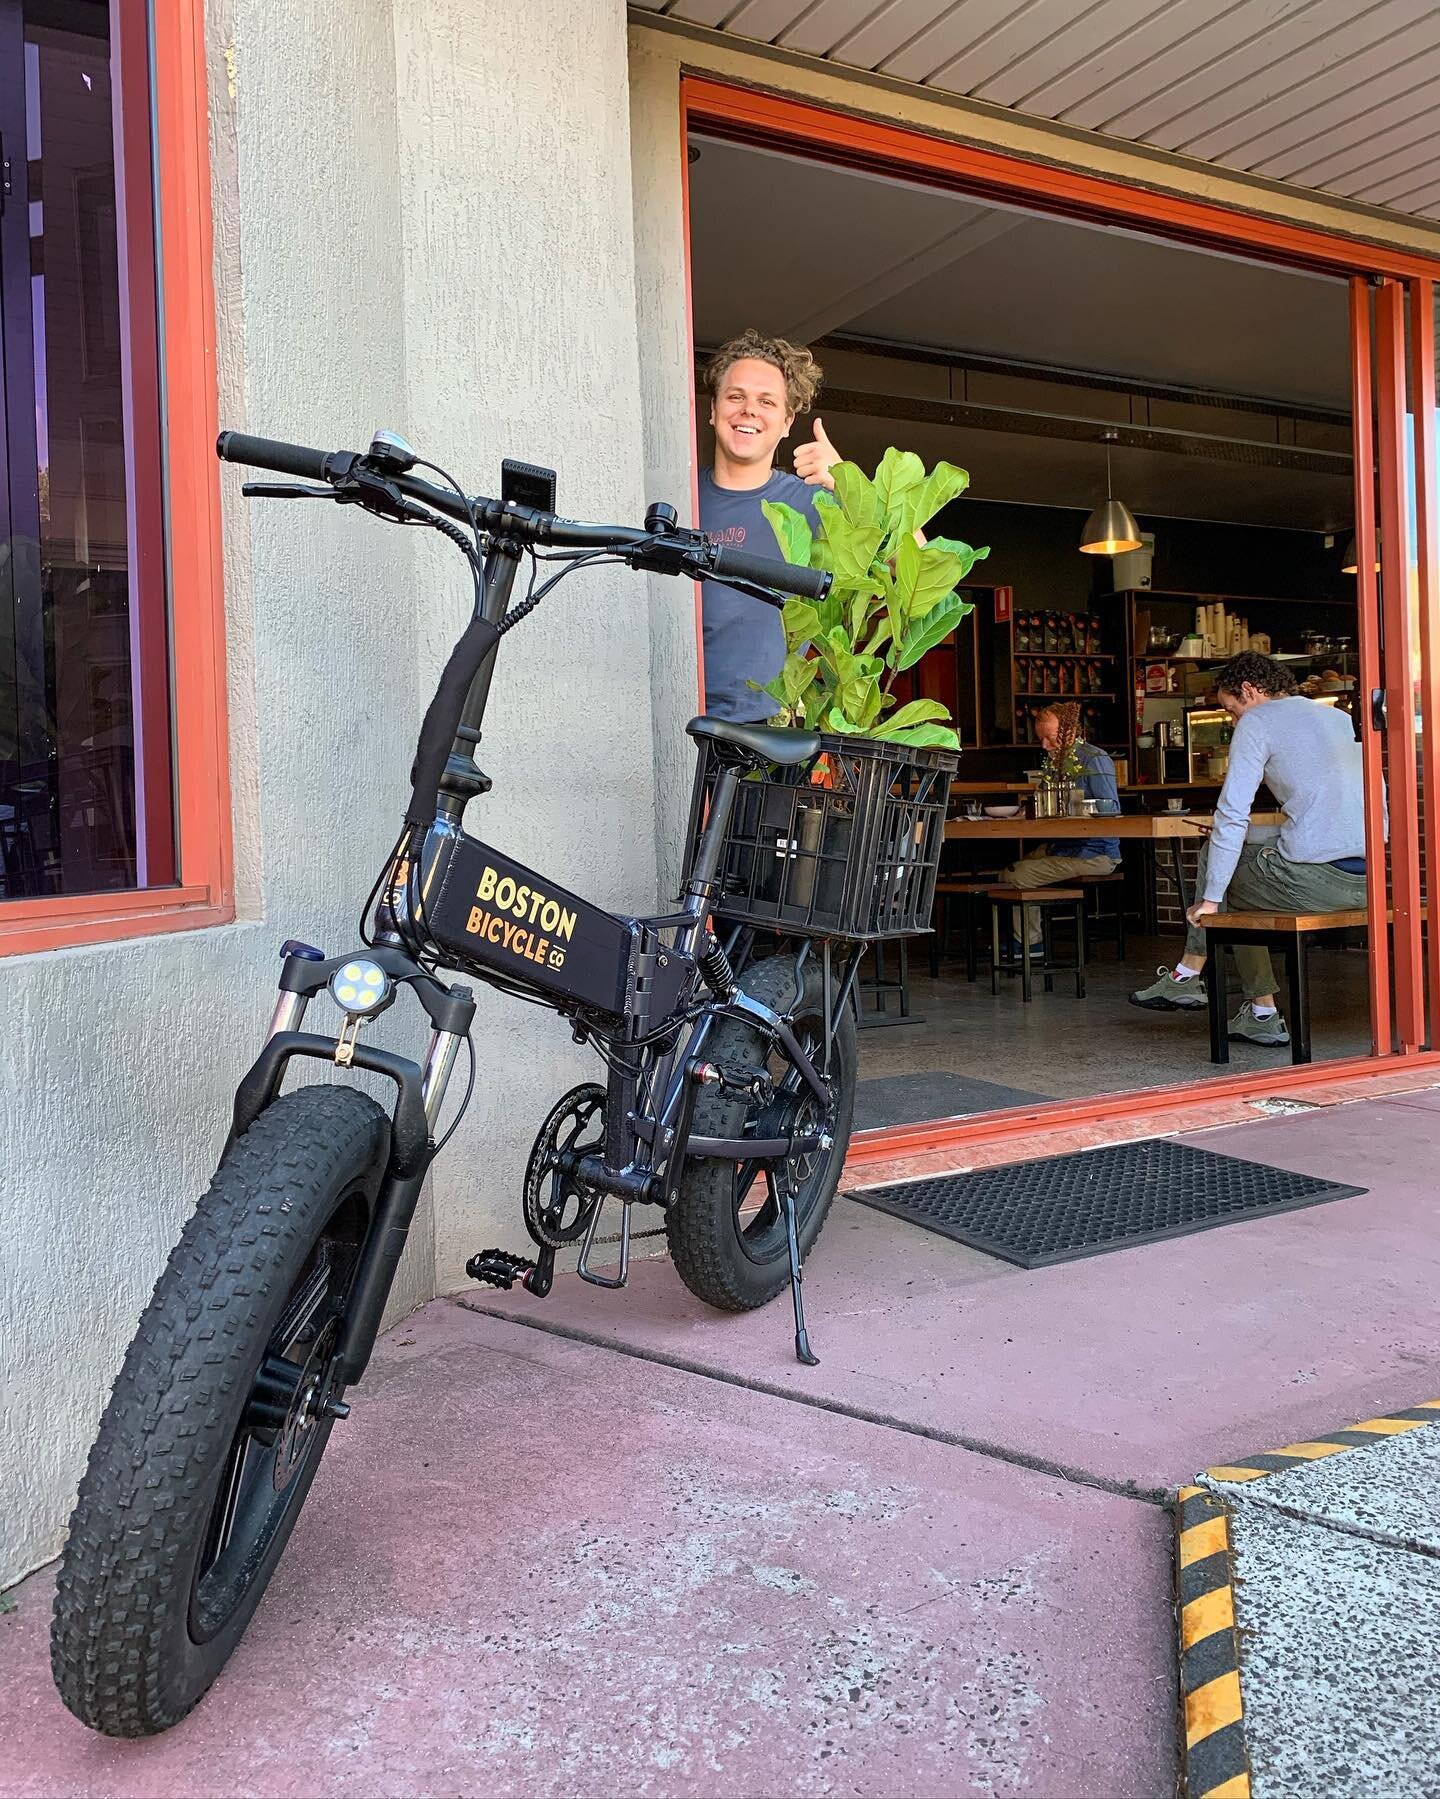 Special plant 🌱 delivery on the @bostonbicycleco T2 🚲 - to my favourite coffee spot ☕️@delanocoffee to the best barista I know. @jarrod_80 #fiddlyfigs #electricbikes #urbangarden